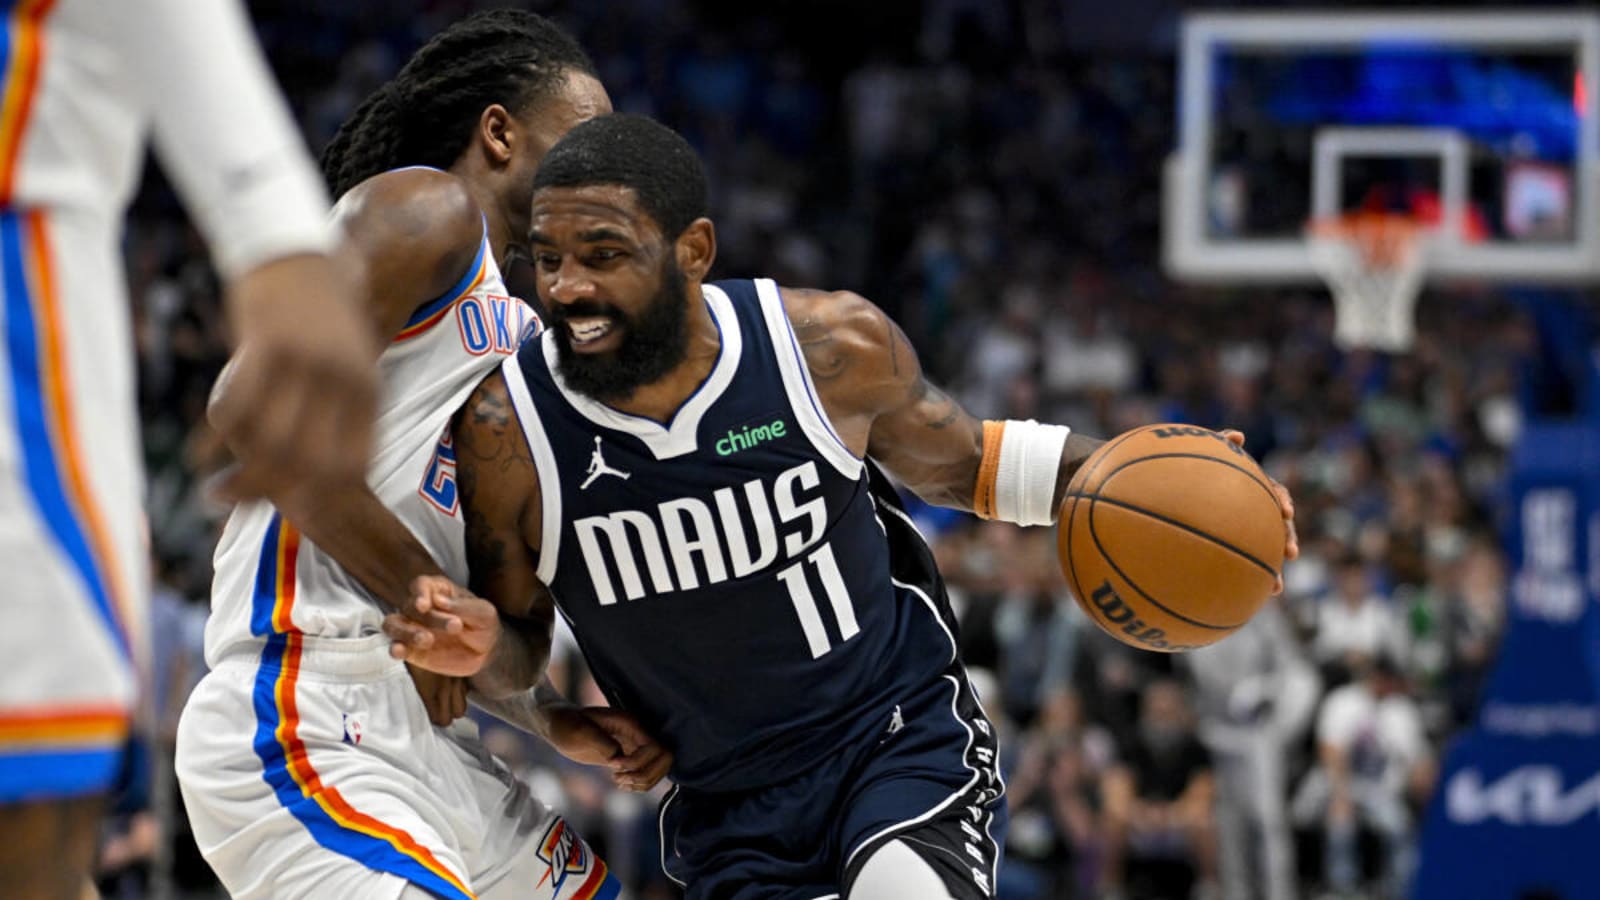 Kyrie Irving Sends Message To Mavericks Teammates Ahead Of Game 5: 'Don't Panic And Stay Poised'